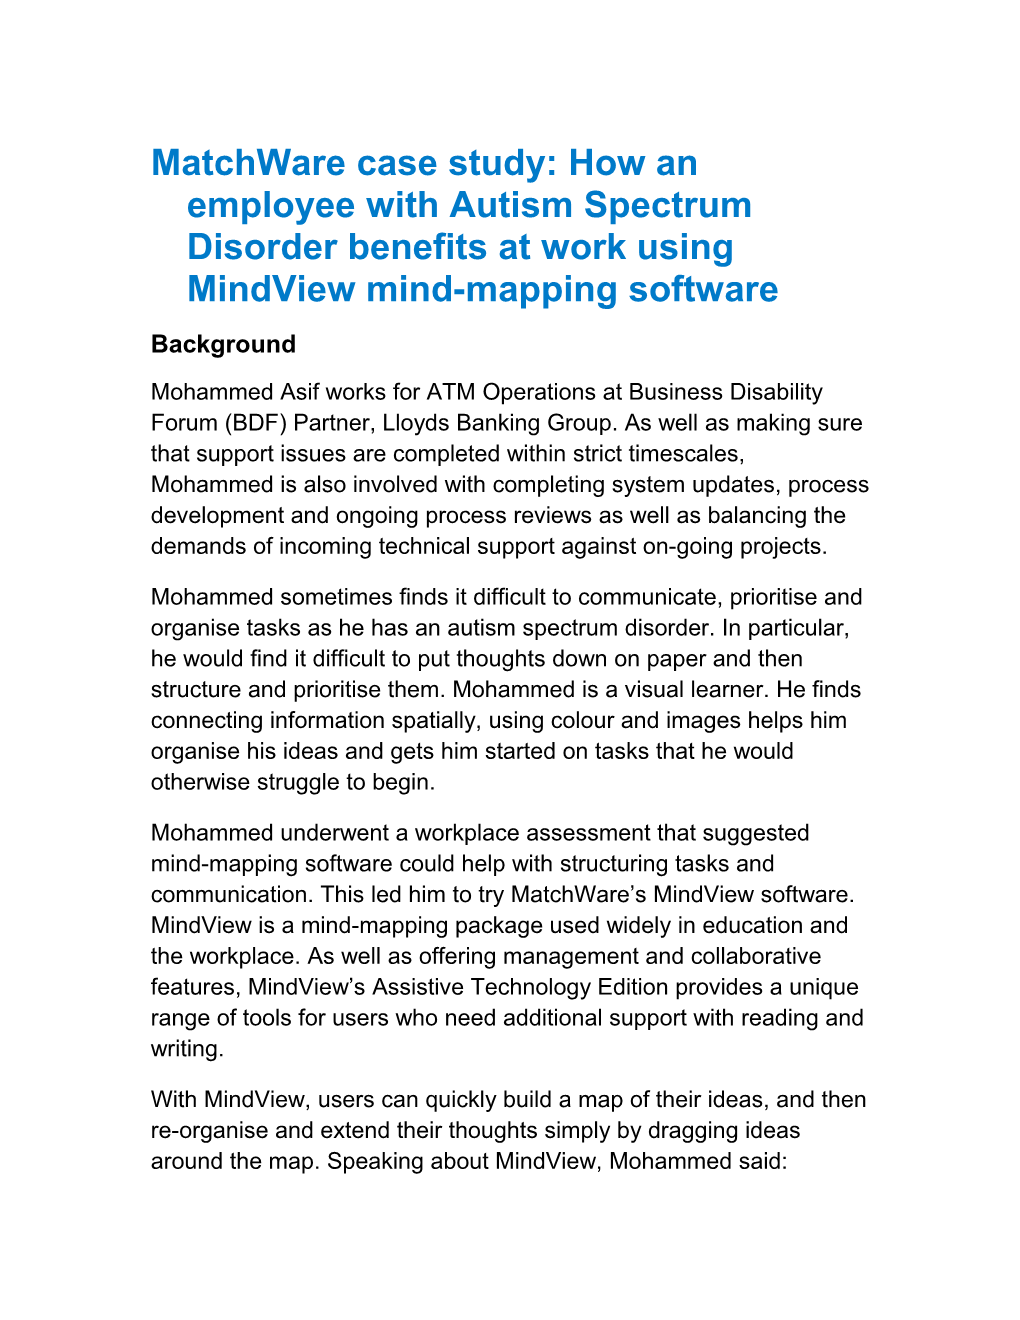 Matchware Case Study: How an Employee with Autism Spectrum Disorder Benefits at Work Using